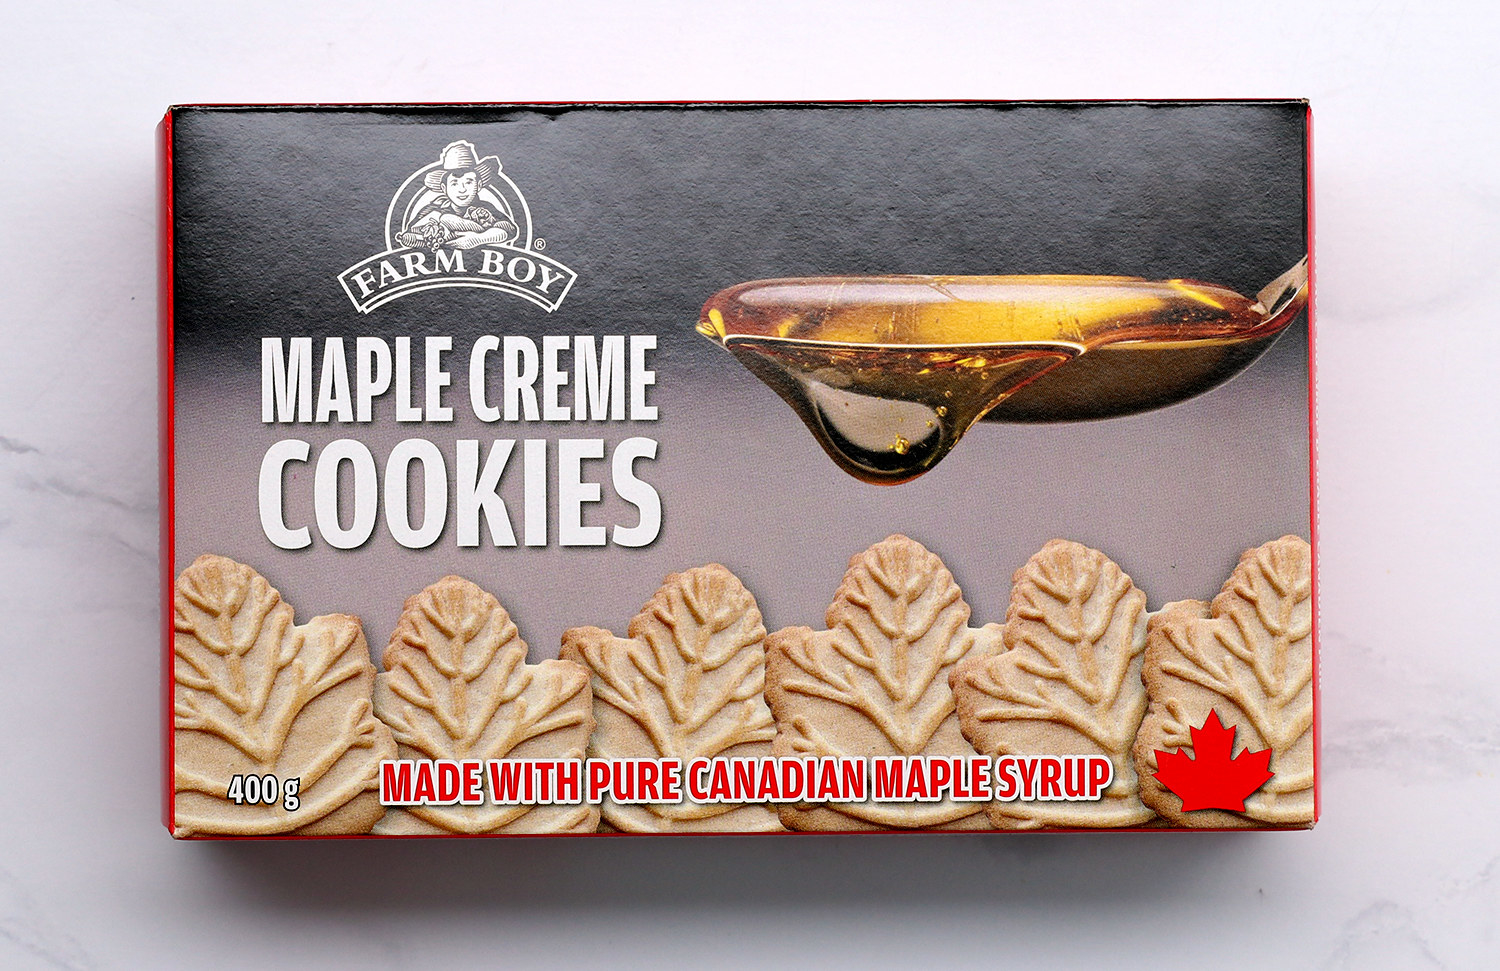 An overhead product shot of Maple Creme Cookies